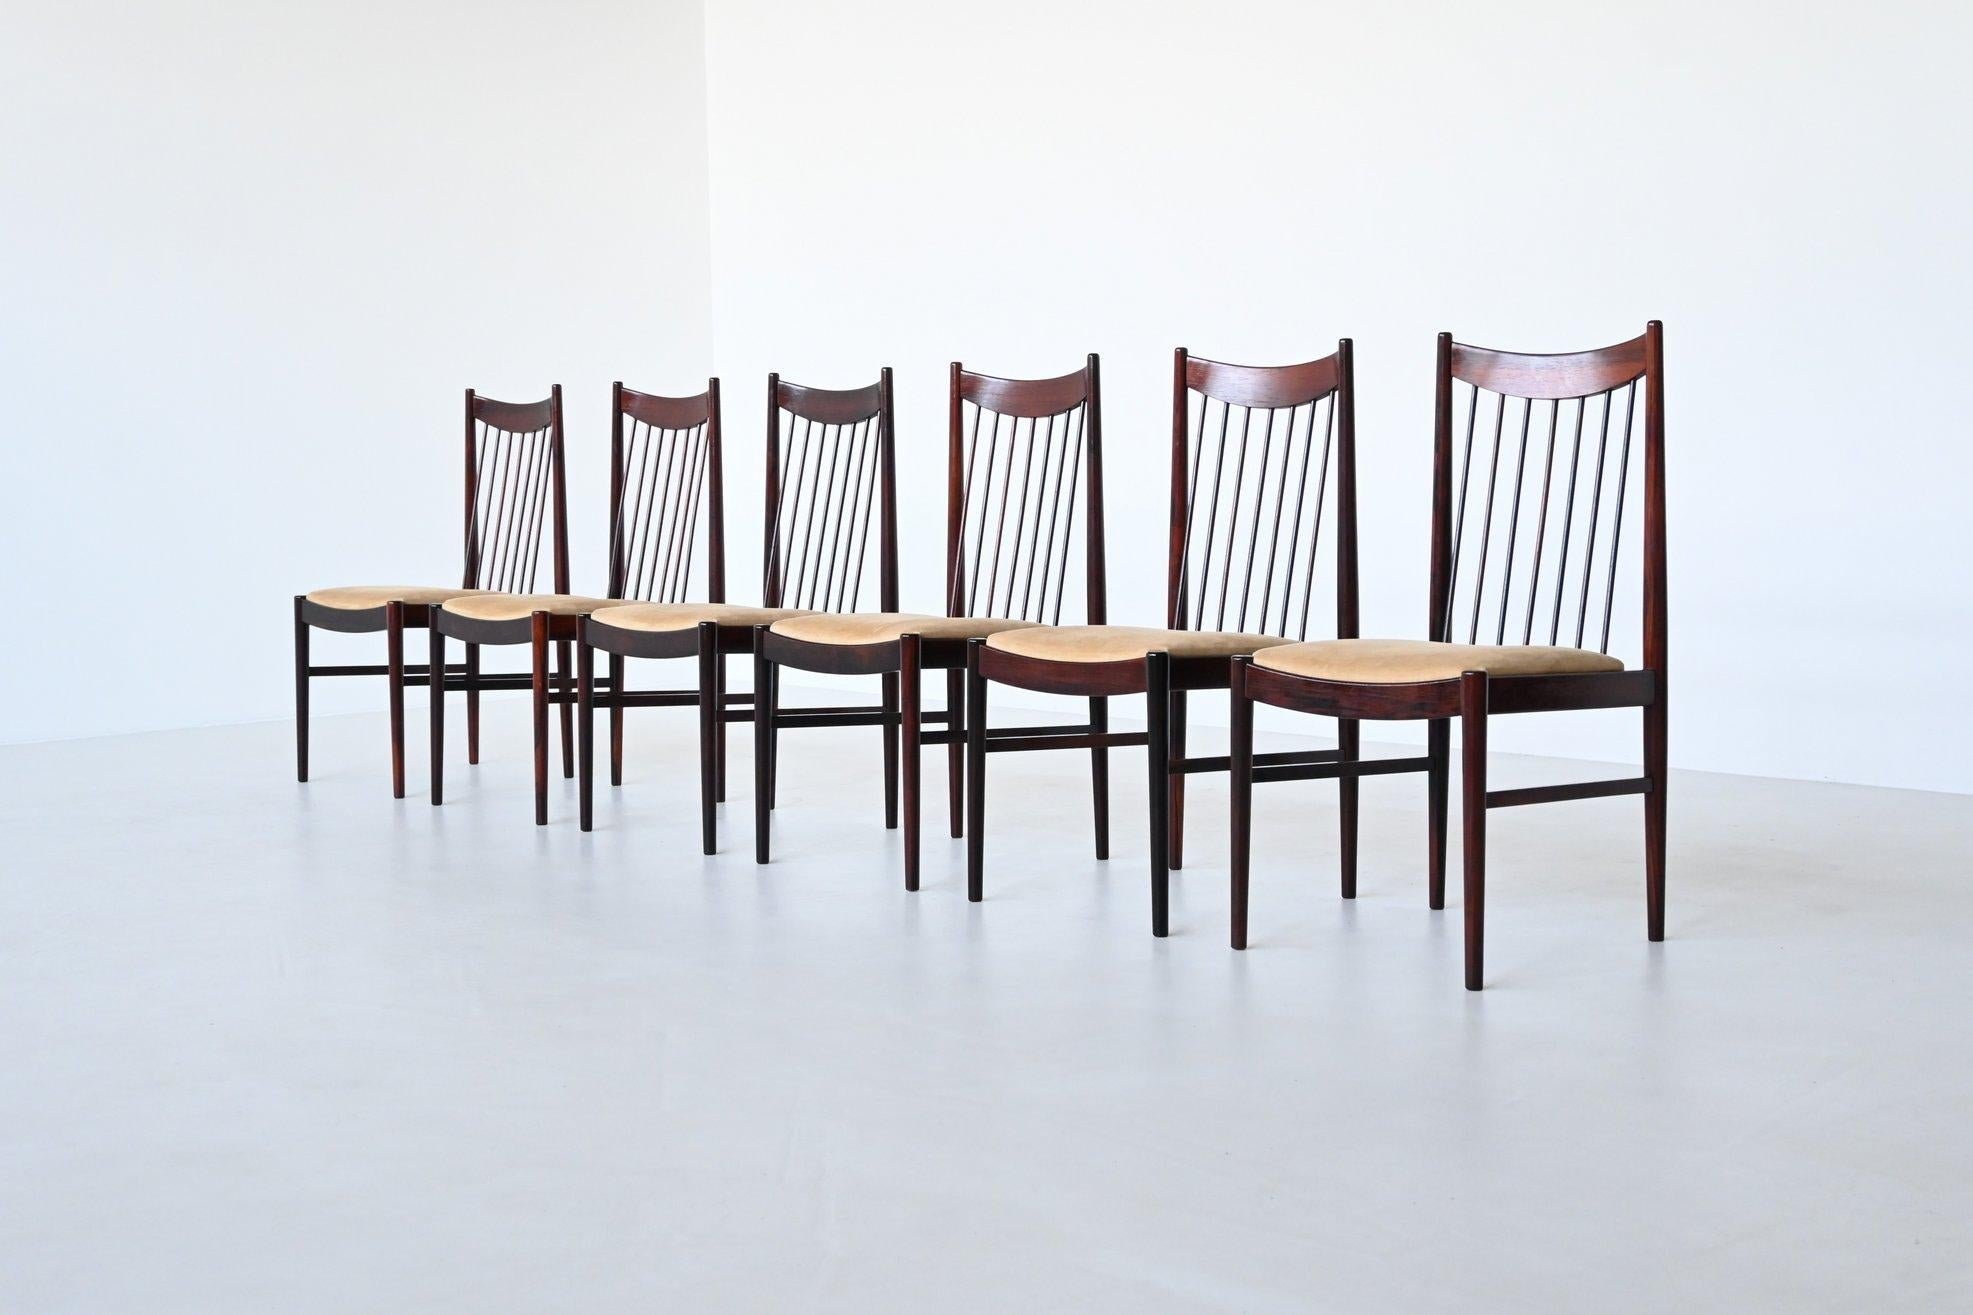 Beautiful shaped set of six dining chairs model 422 designed by Helge Sibast for Sibast Mobler, Denmark 1960. These well-crafted chairs are made of solid rosewood and the seats are upholstered with beige suede fabric. Very nice detailed such as the